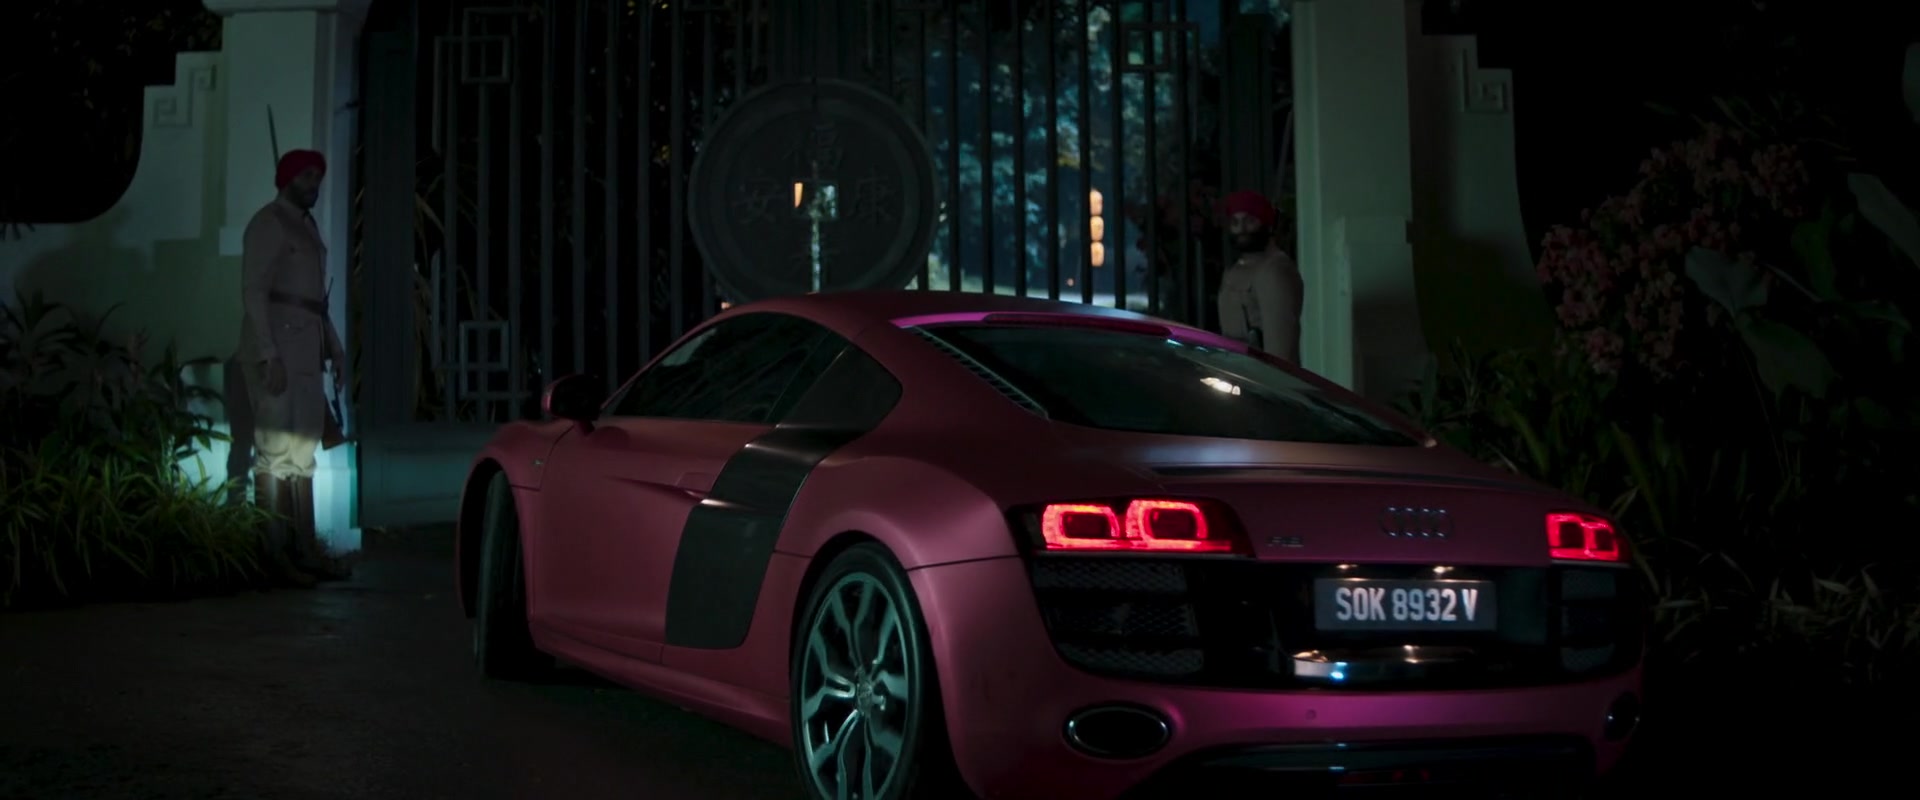 Audi R8 Sports Car Used by Awkwafina in Crazy Rich Asians (2018) Movie1920 x 800